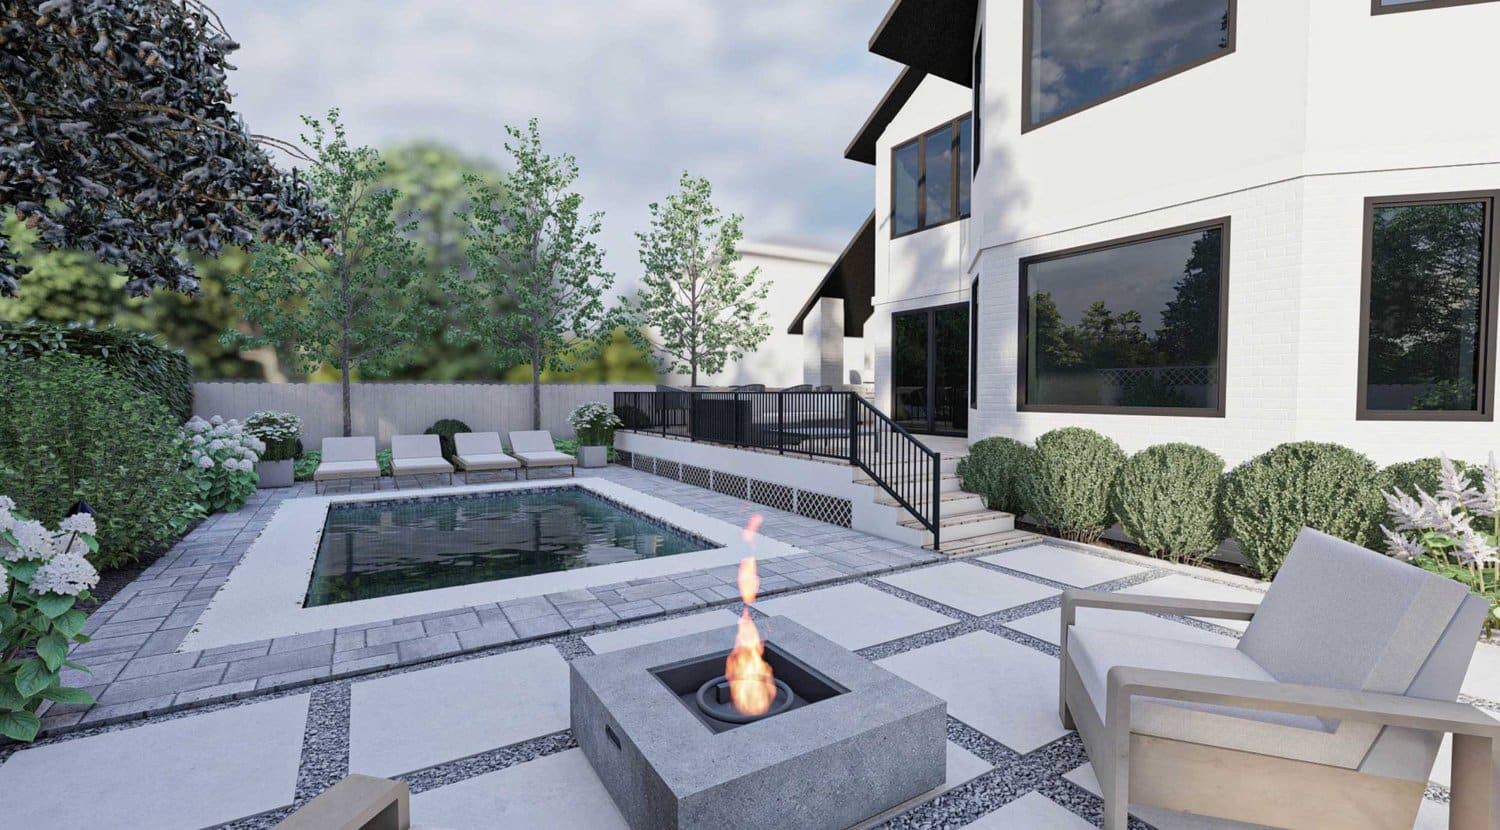 Lakewood back yard showing paver patio fire pit seating area, and swimming pool with swim bench on concrete paver deck